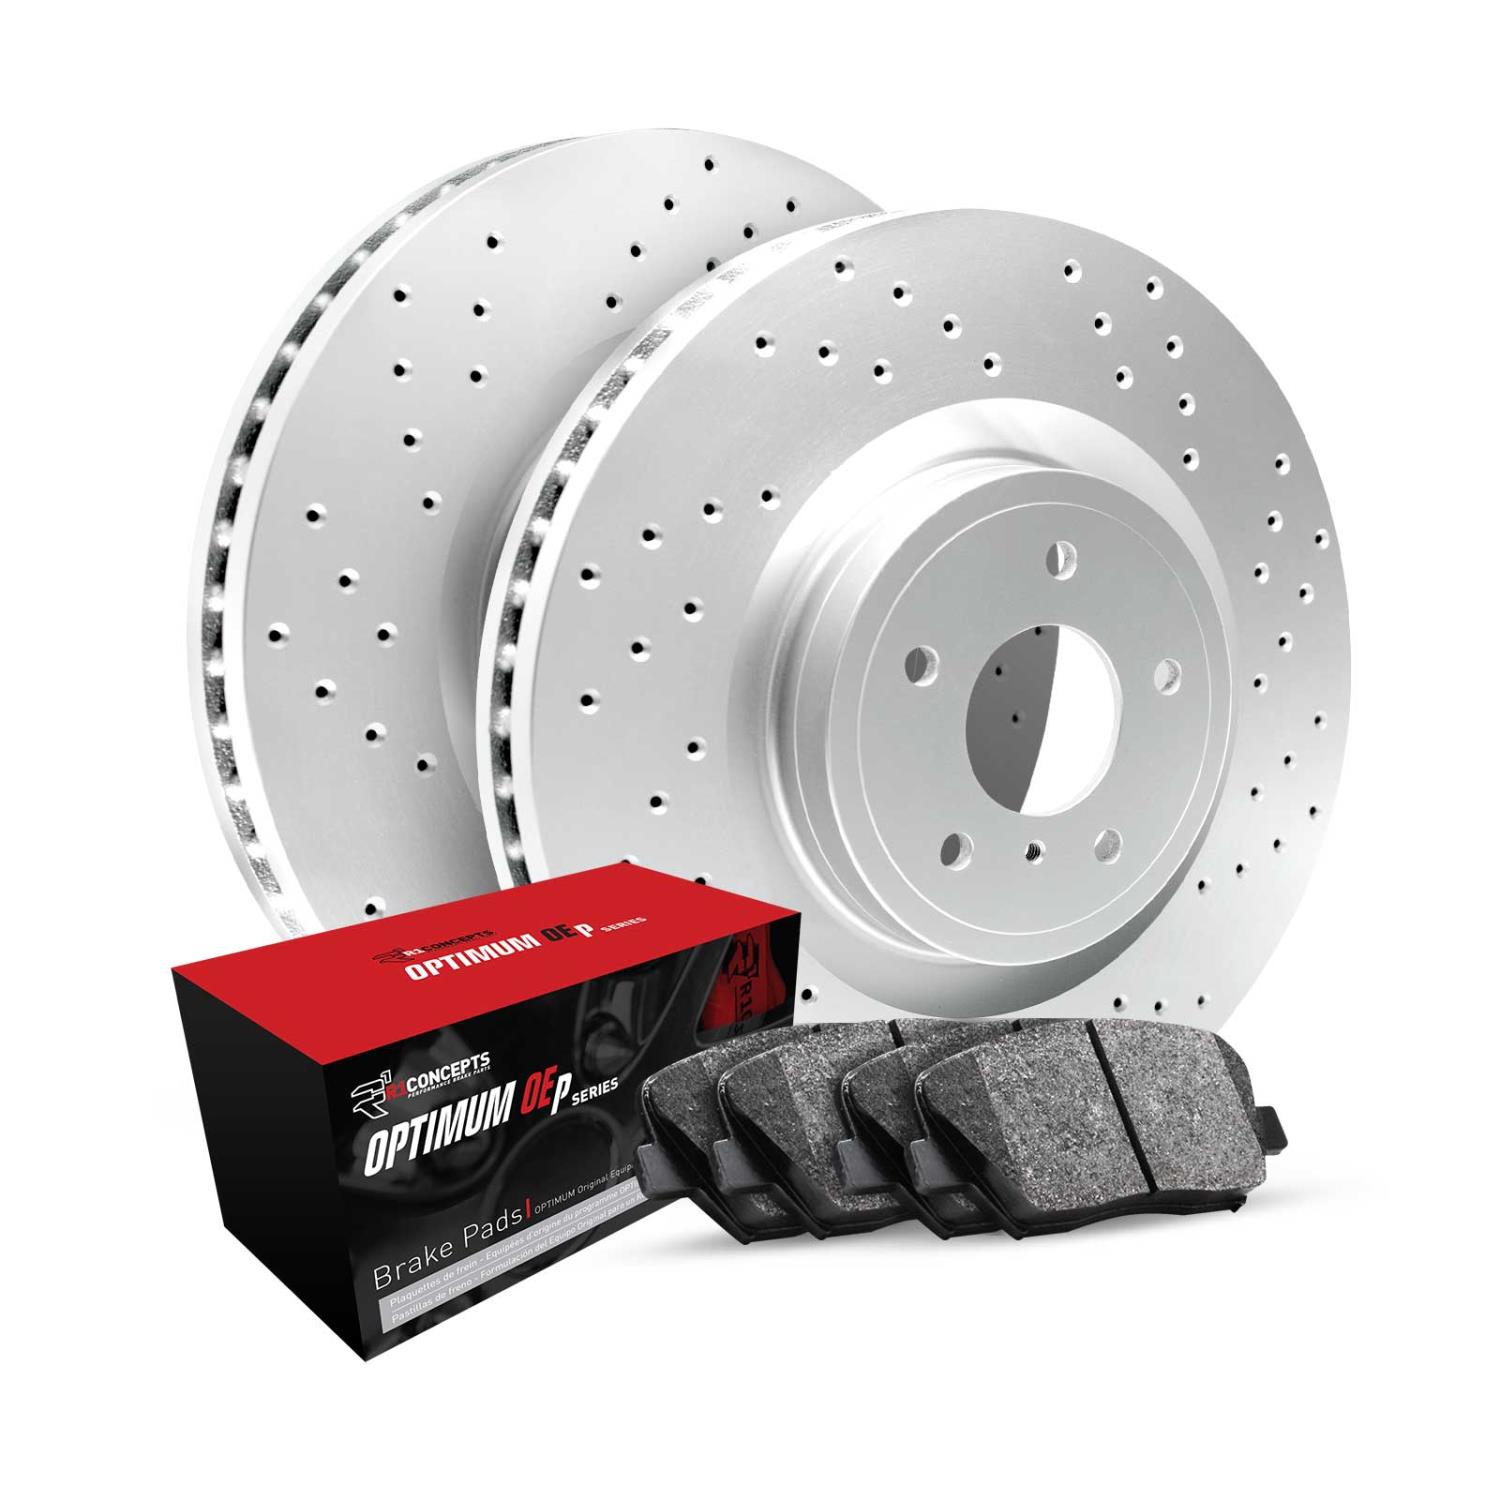 GEO-Carbon Drilled Brake Rotor Set w/Optimum OE Pads, 2007-2017 Fits Multiple Makes/Models, Position: Rear